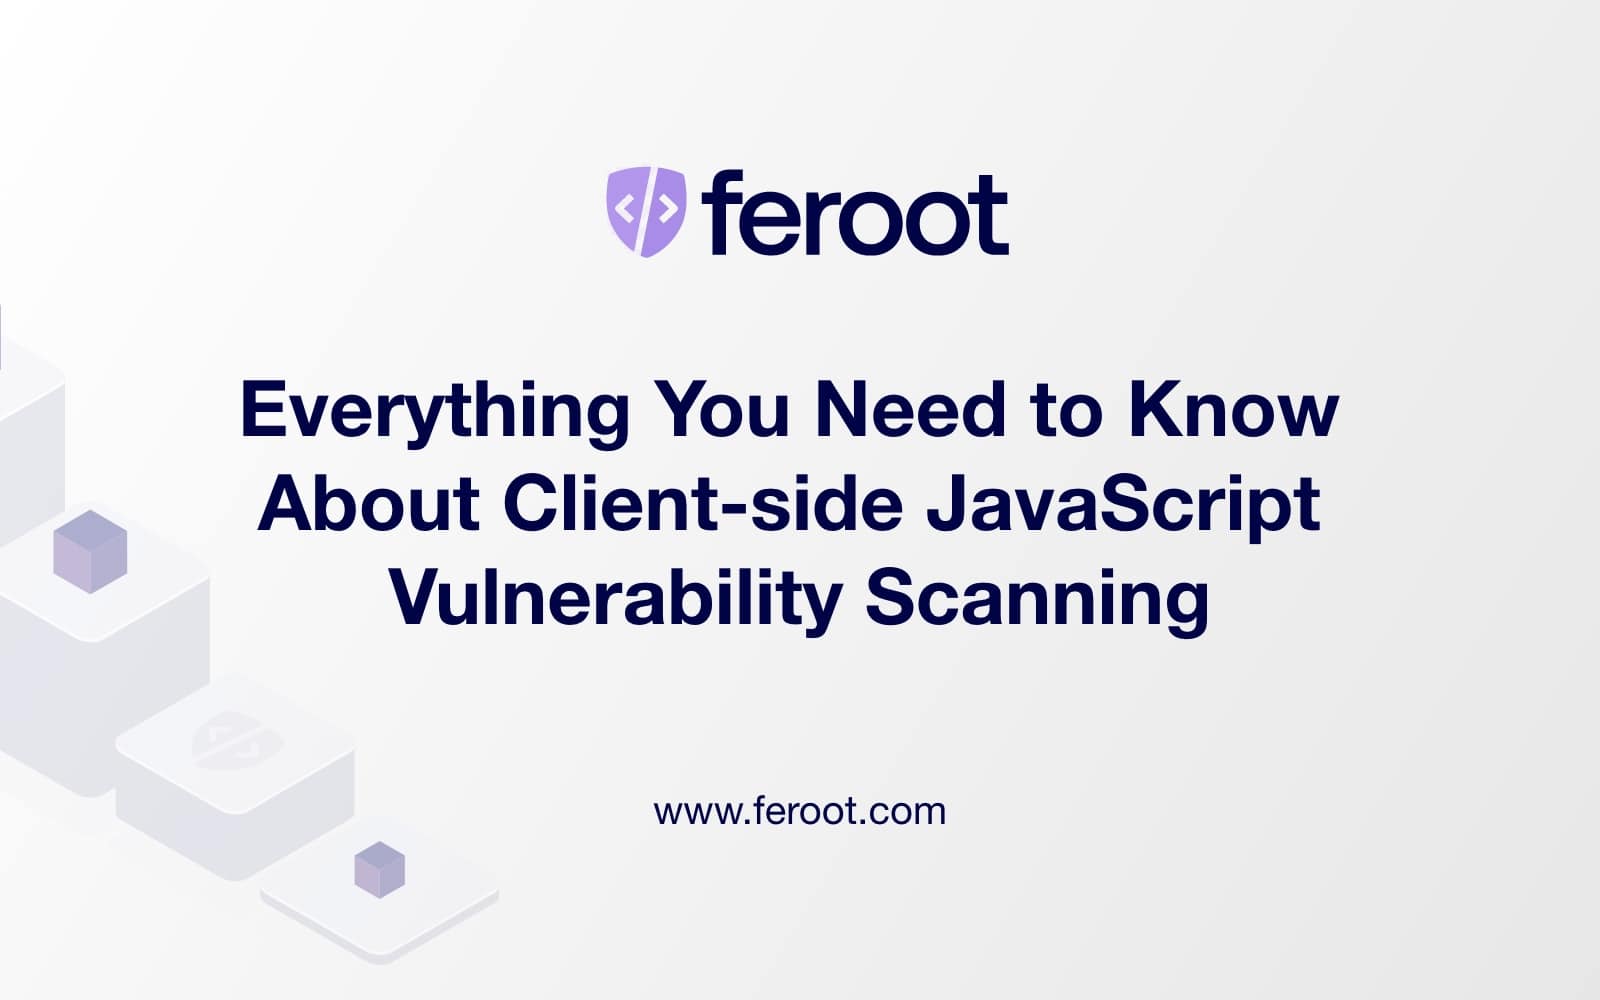 Client-side Vulnerability Scanning